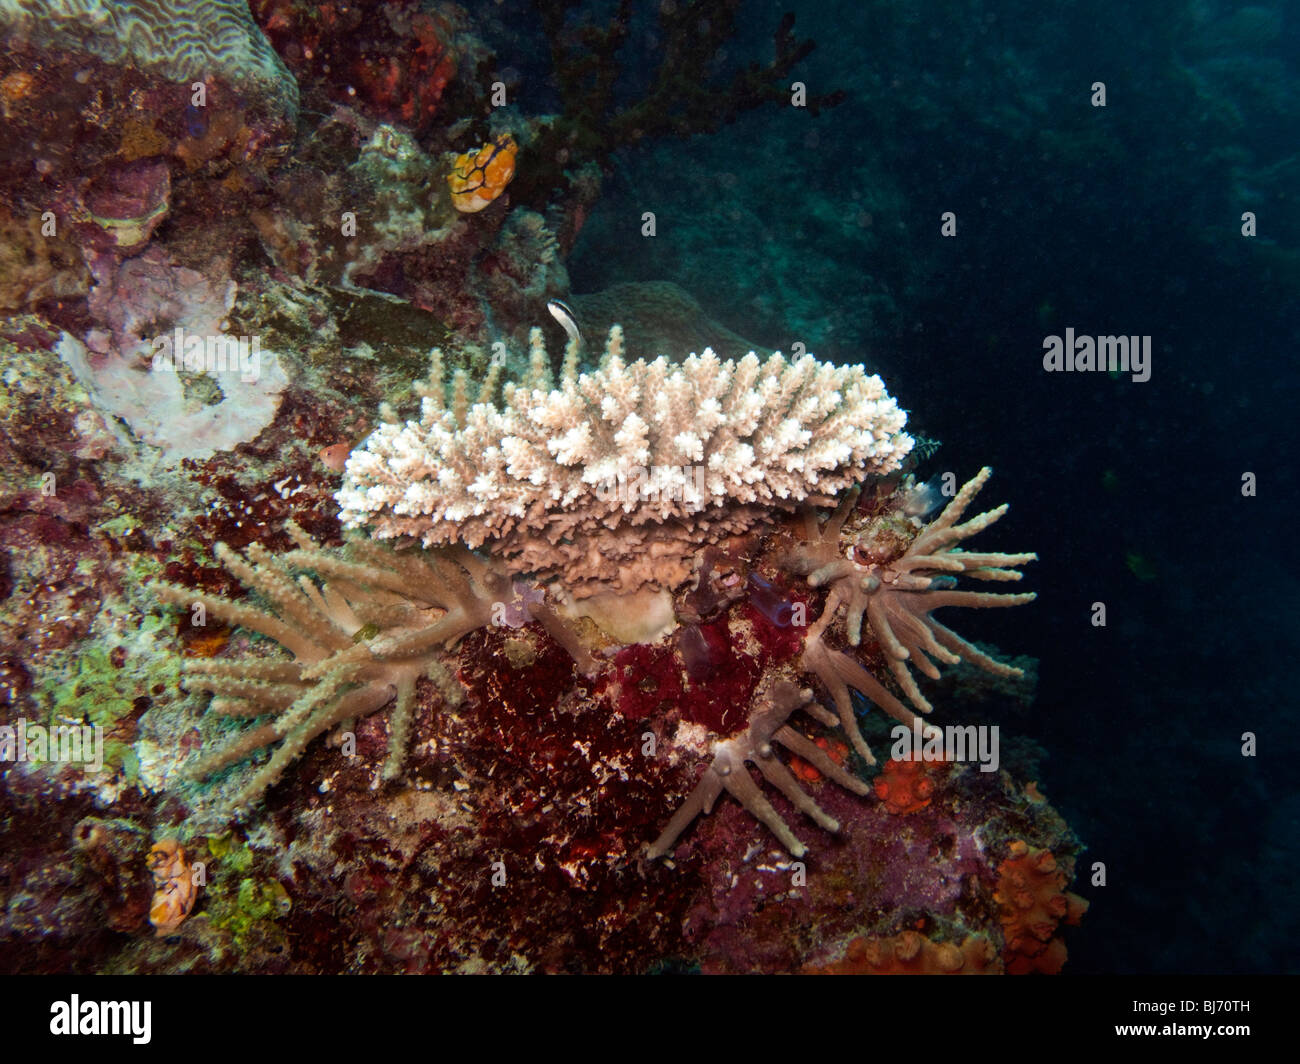 Indonesia, Sulawesi, Wakatobi National Park, coral reef underwater, colourful diverse hard corals Stock Photo